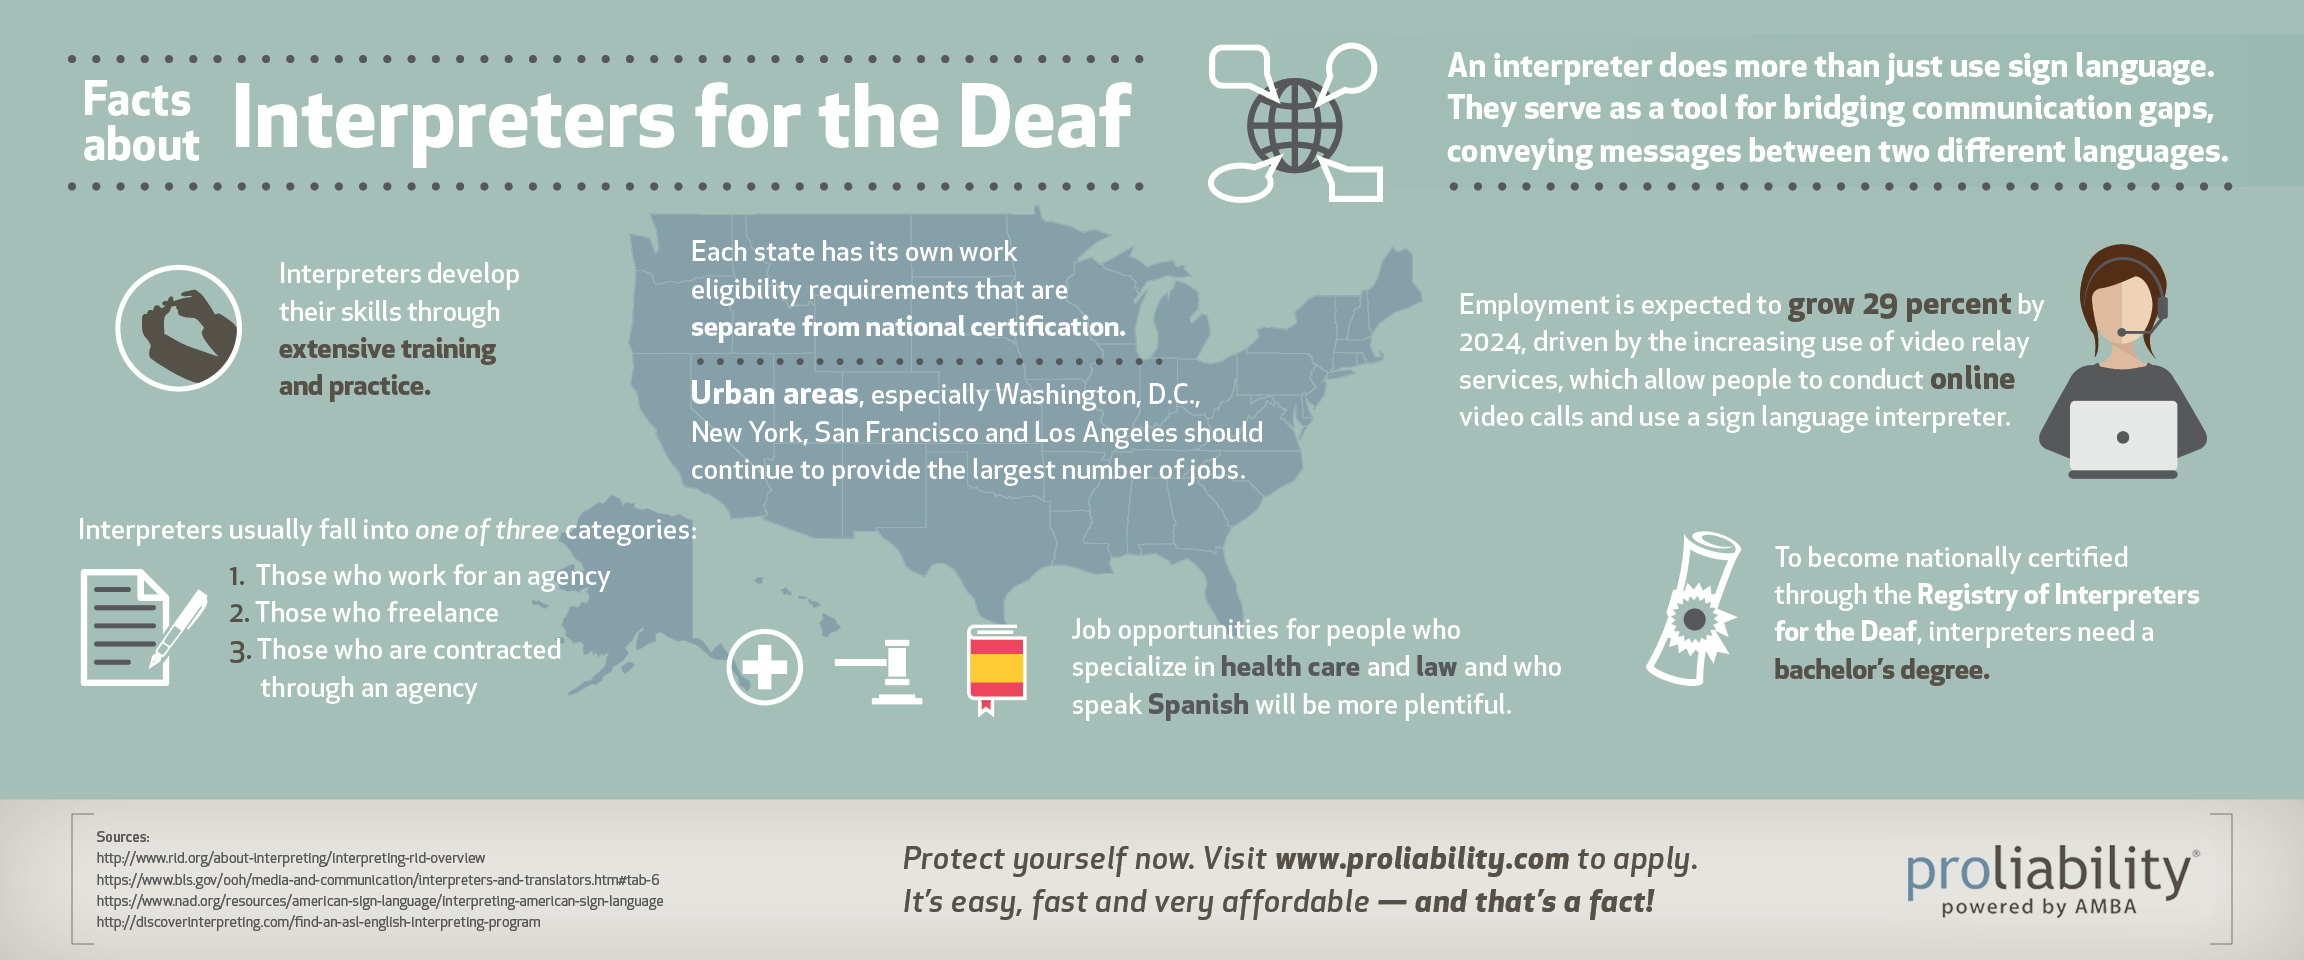 Interpreters for the Deaf Infographic